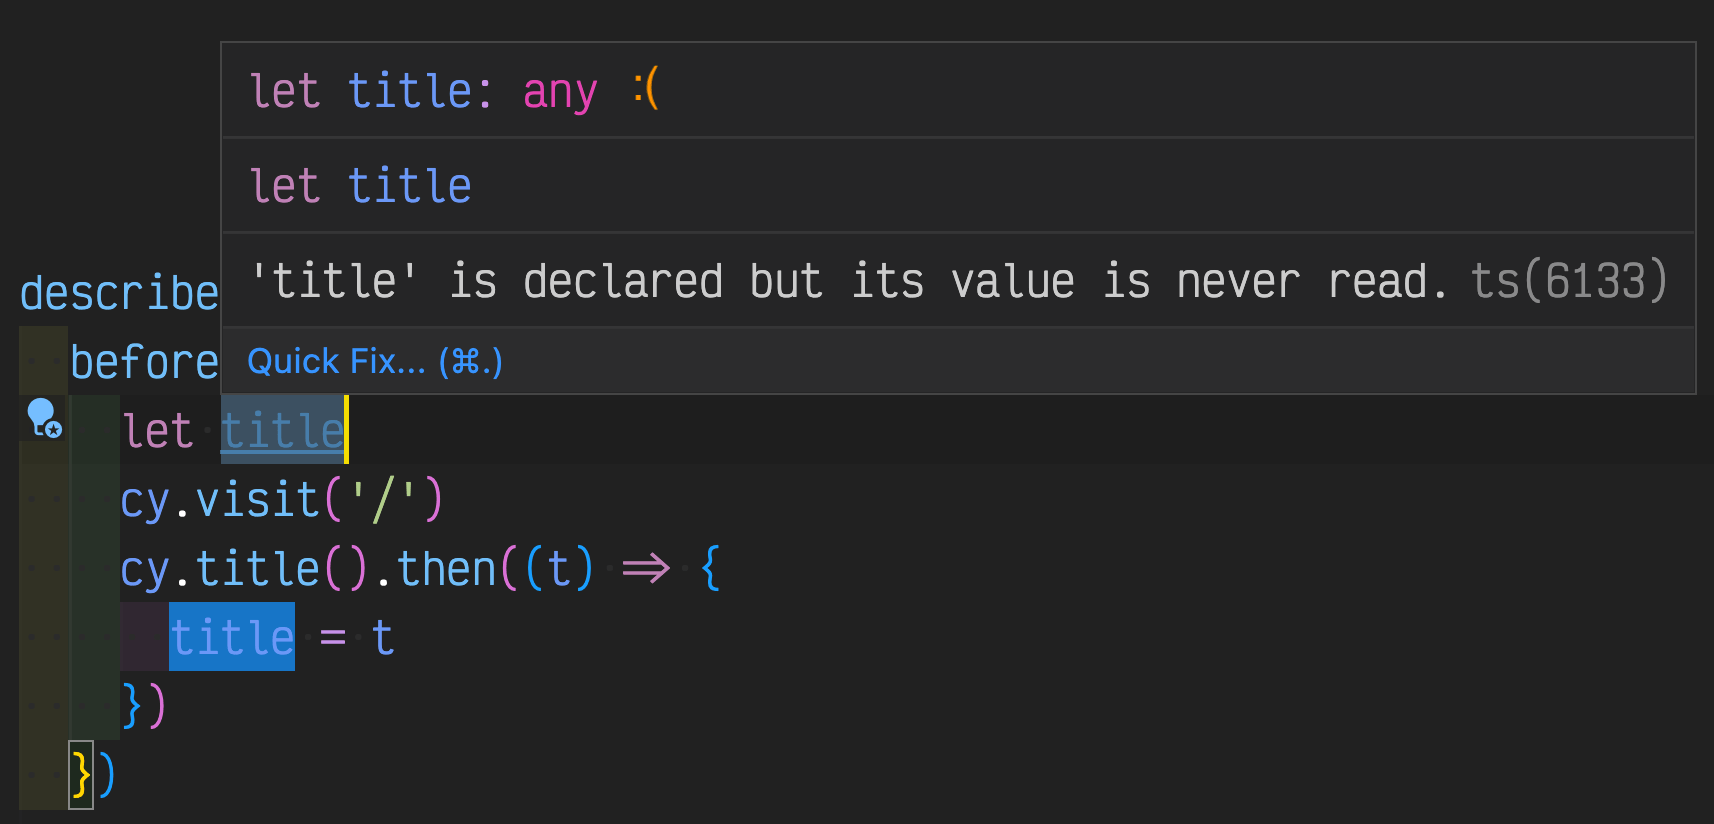 VSCode shows the title variable having type any